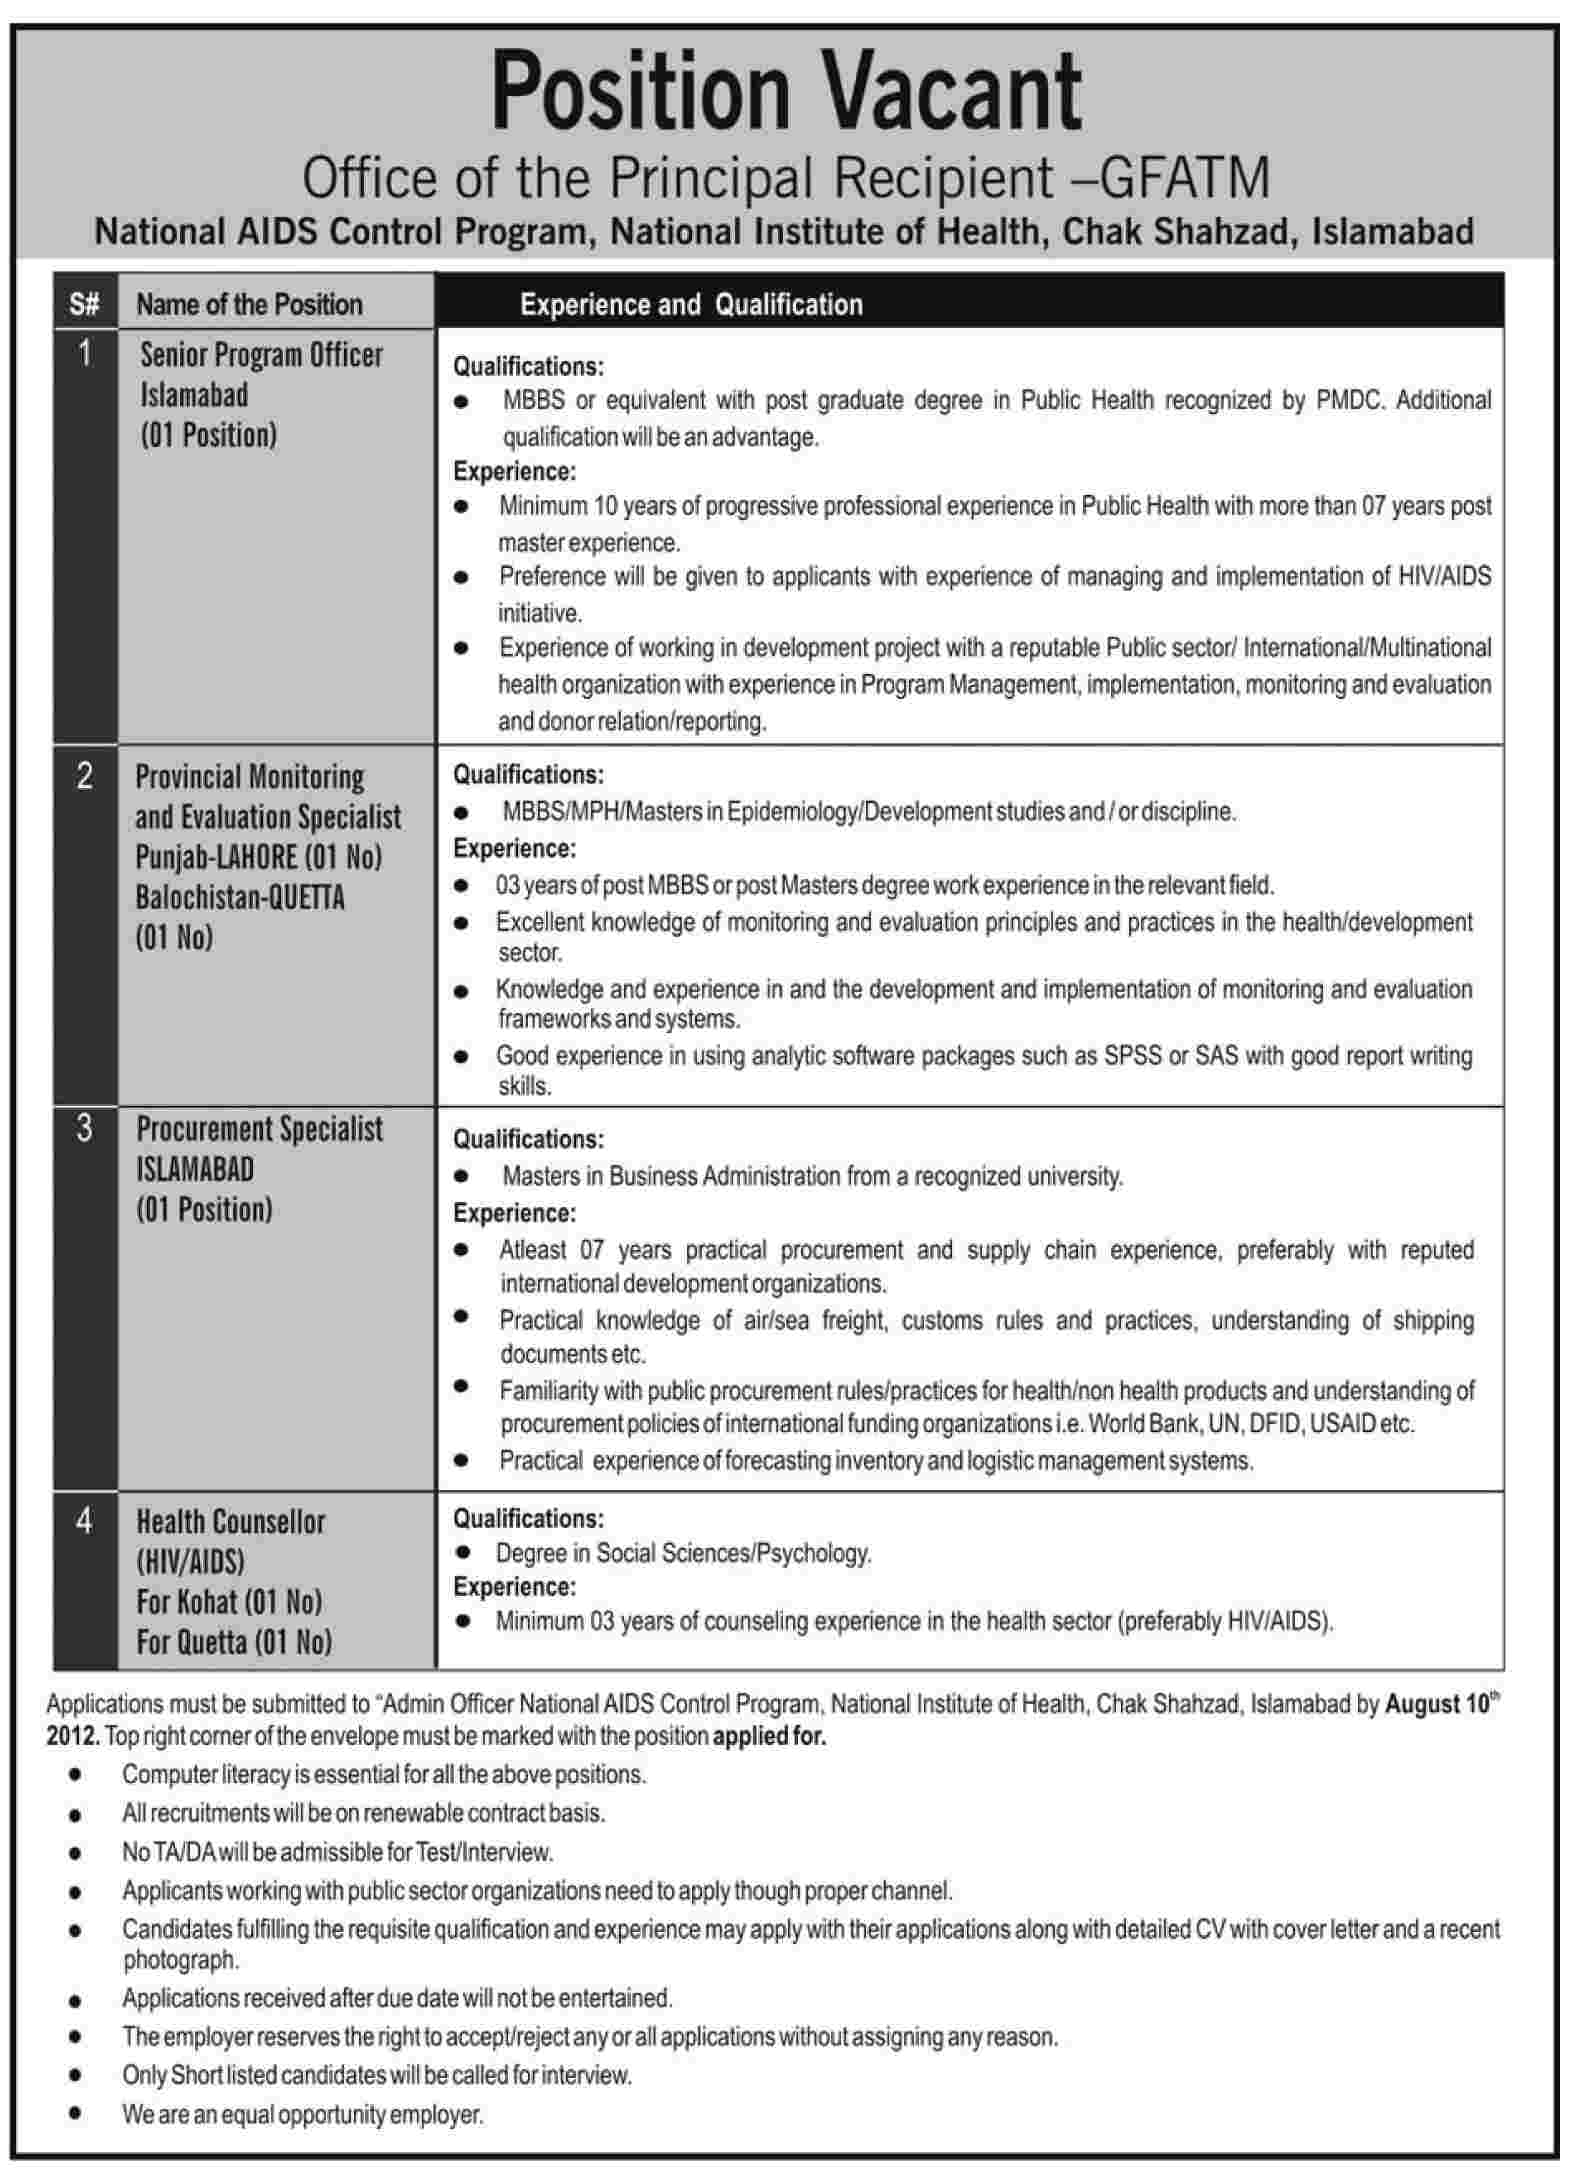 National AIDS Control Program, National Institute of Health Requires Management Staff and Health Counselor (